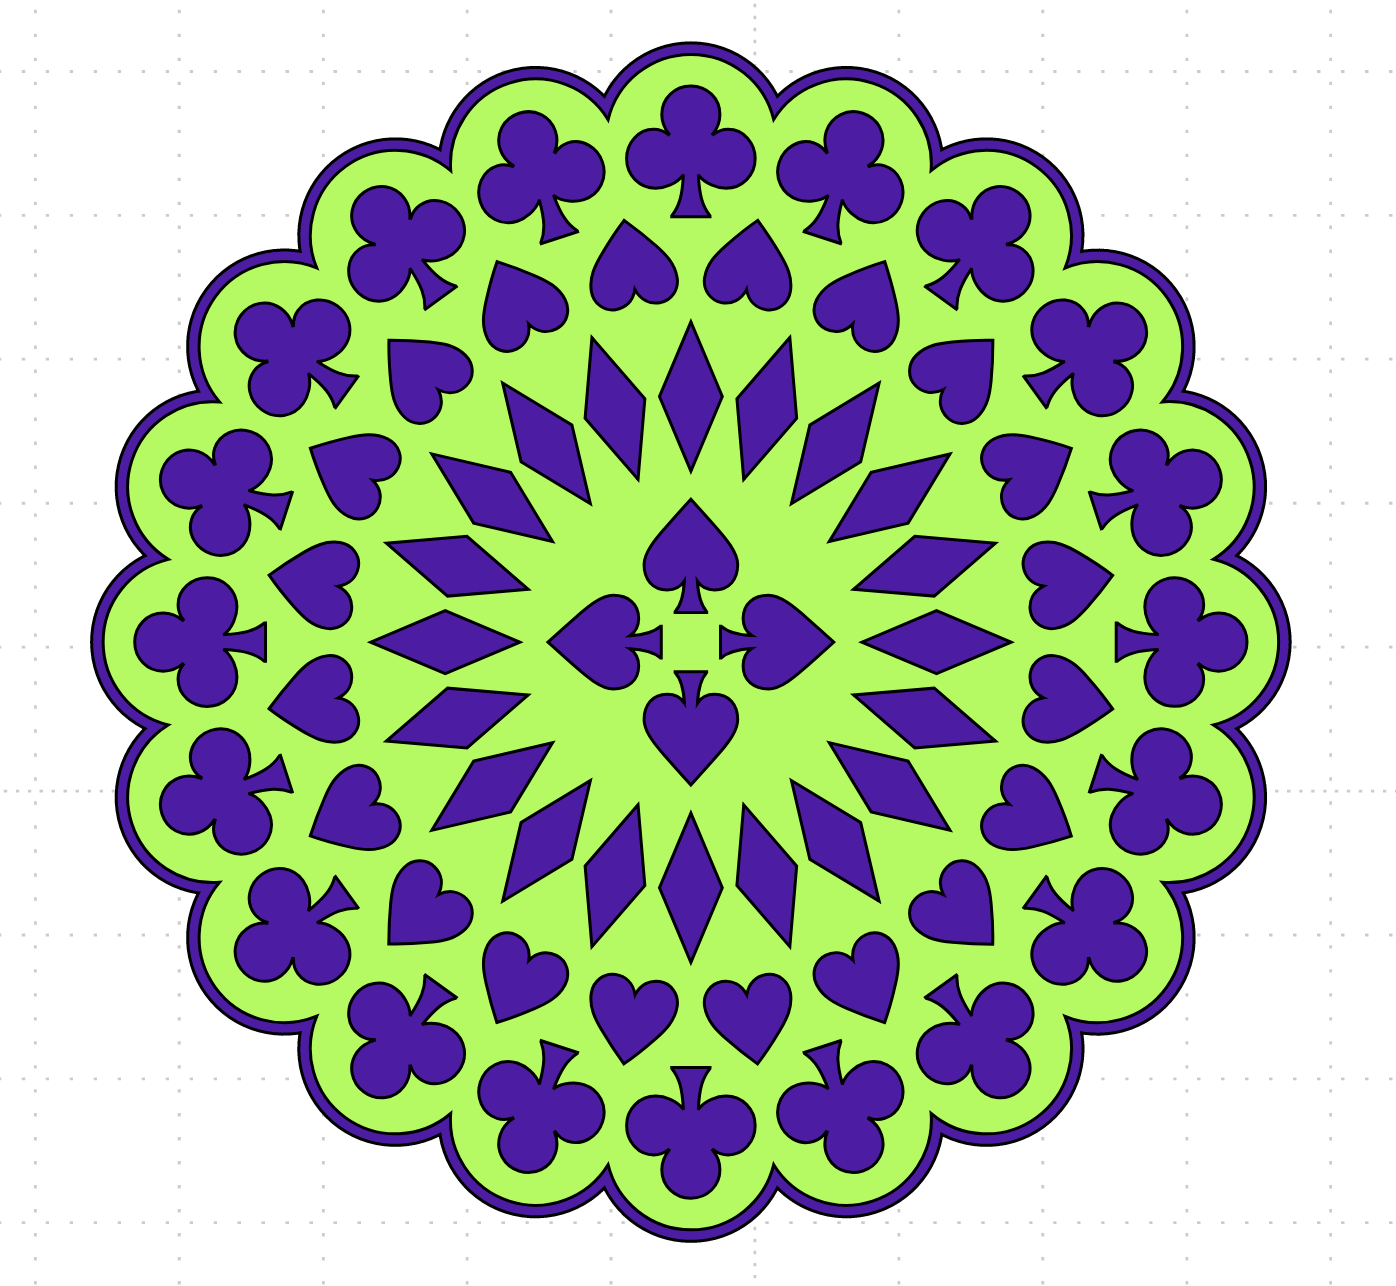 Download Crafting chaos: Scan N Cut - How to Create a Custom Doily! free SVG download available